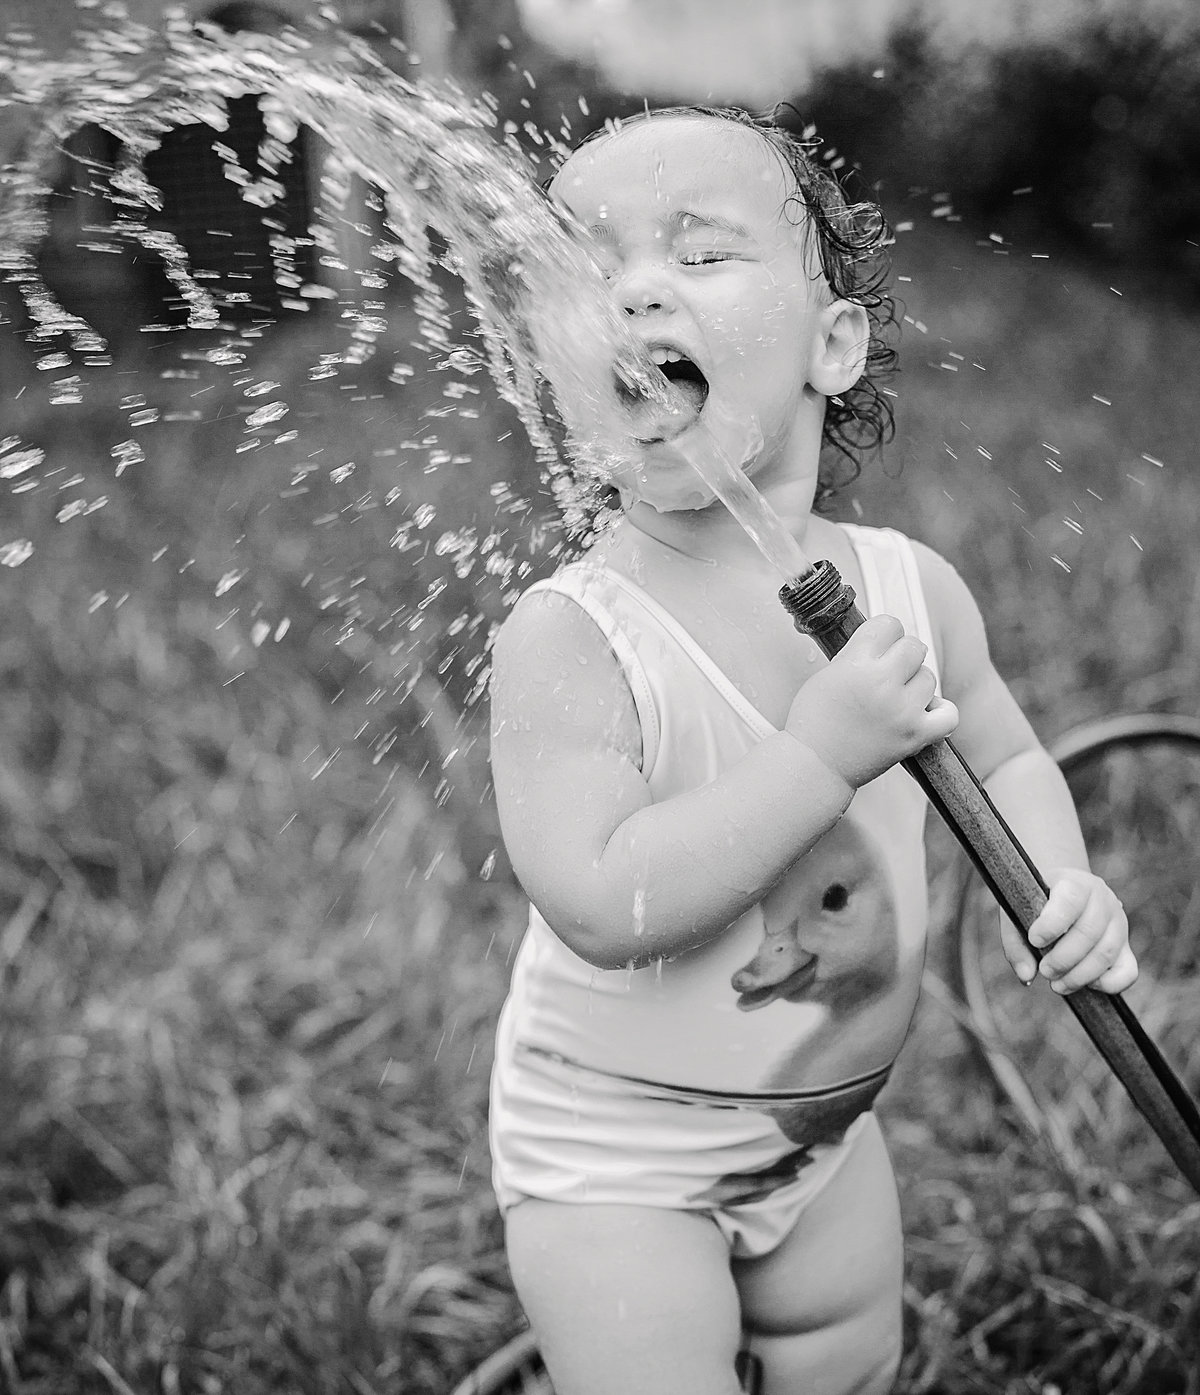 charlotte documentary photographer jamie lucido creates a beautiful and playful image of a small child drinking out of a backyard hose